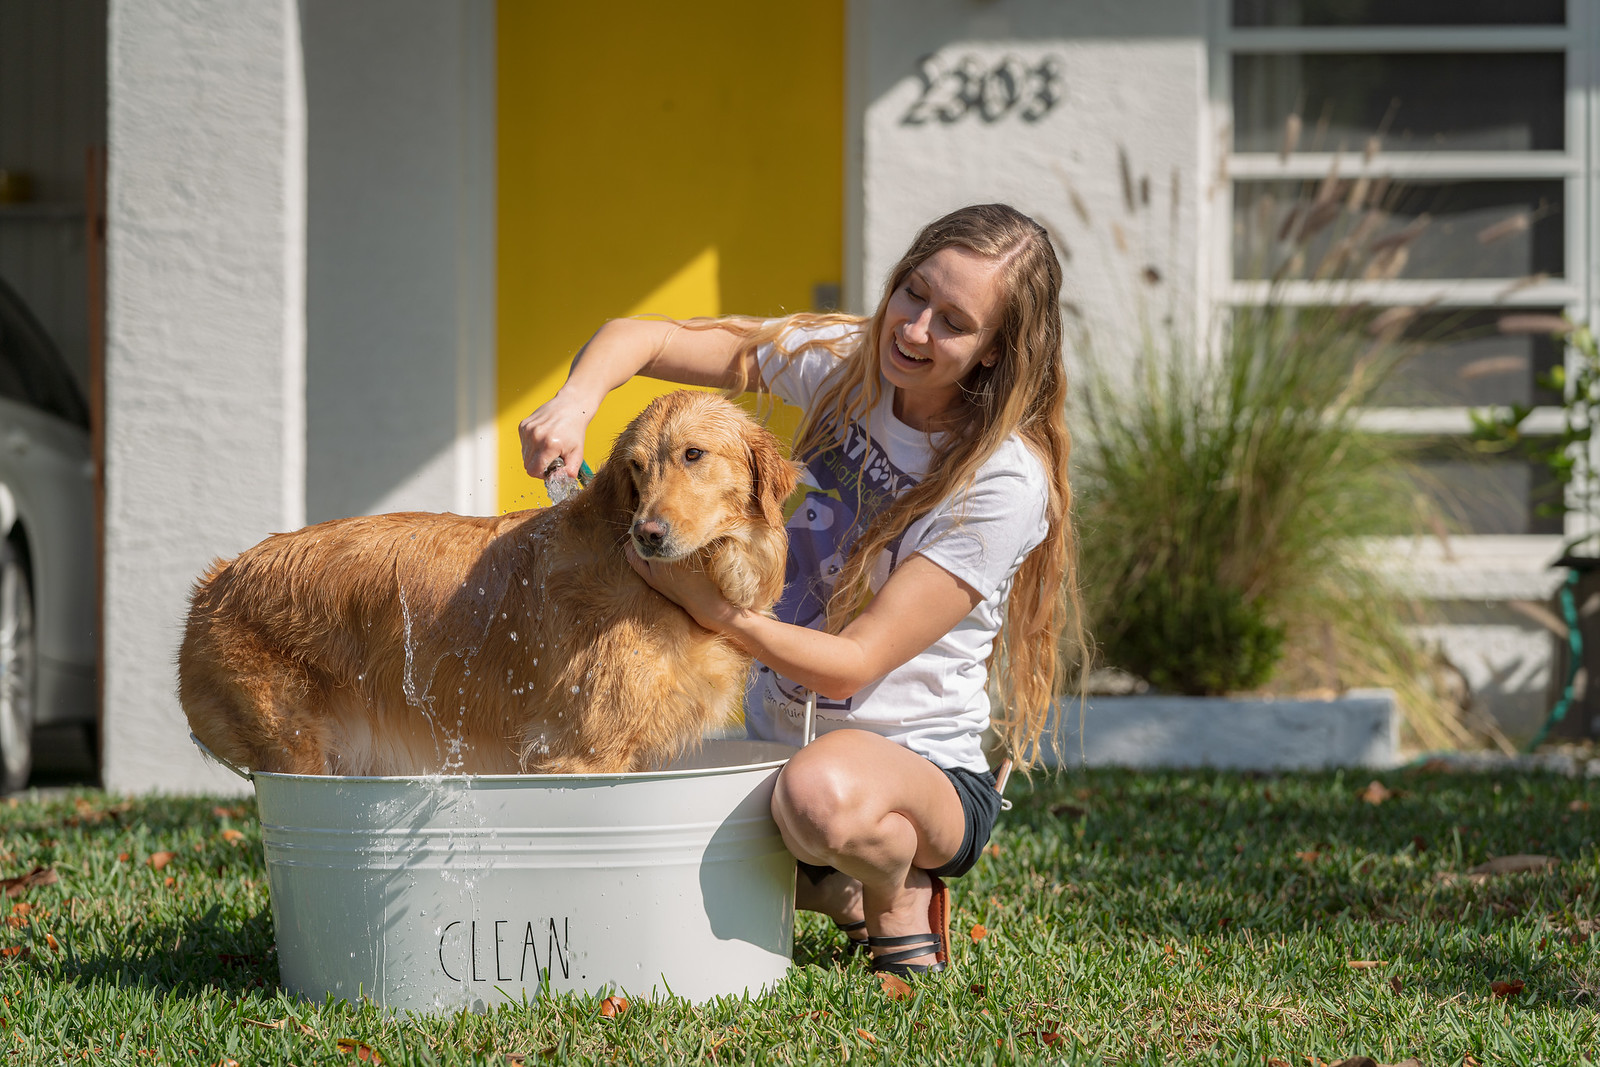 Girl squats down next to dog while she gives a bath to dog in a bucket that says "Clean"